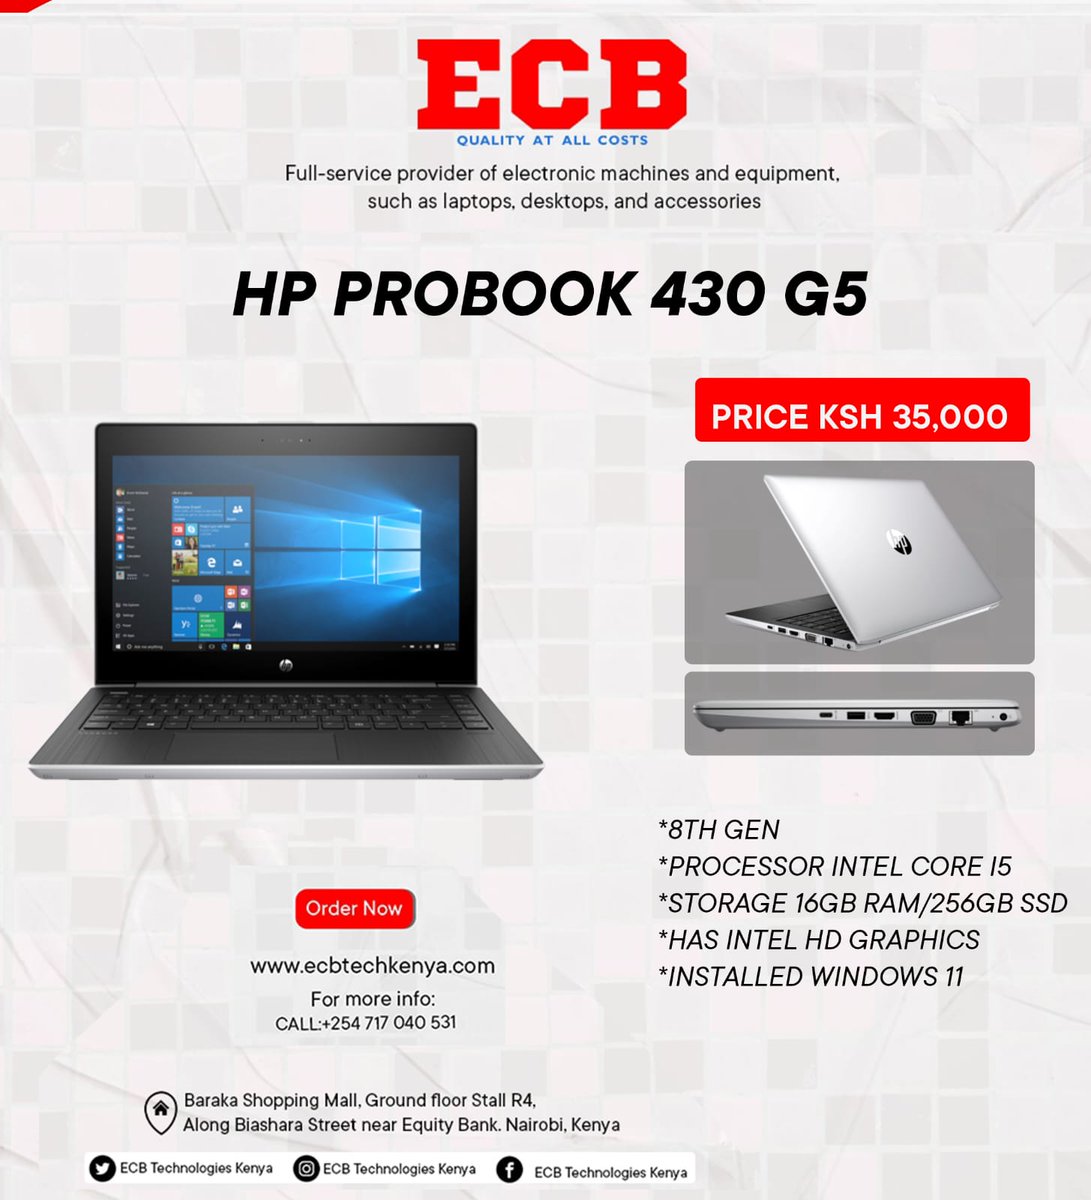 At only 35k, you can get this HP Probook 430 G5 , an 8th Generation laptop with installed windows 11
#ECBTechnologiesKE
Quality laptop 
Ecbtechkenya